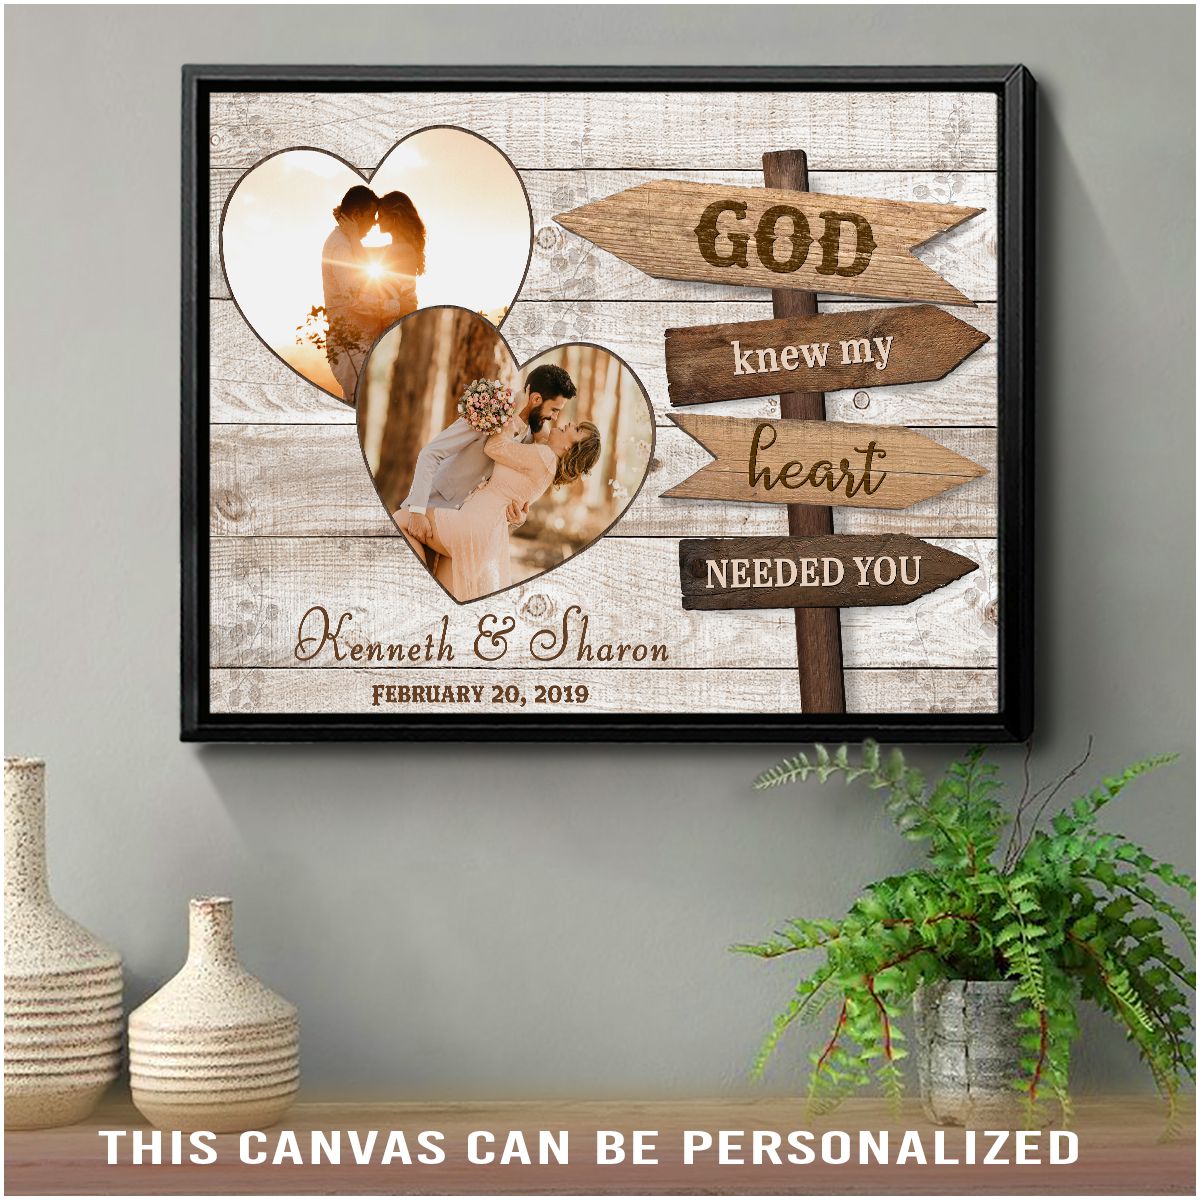 Personalized Anniversary Gifts, Personalized Gifts for Him